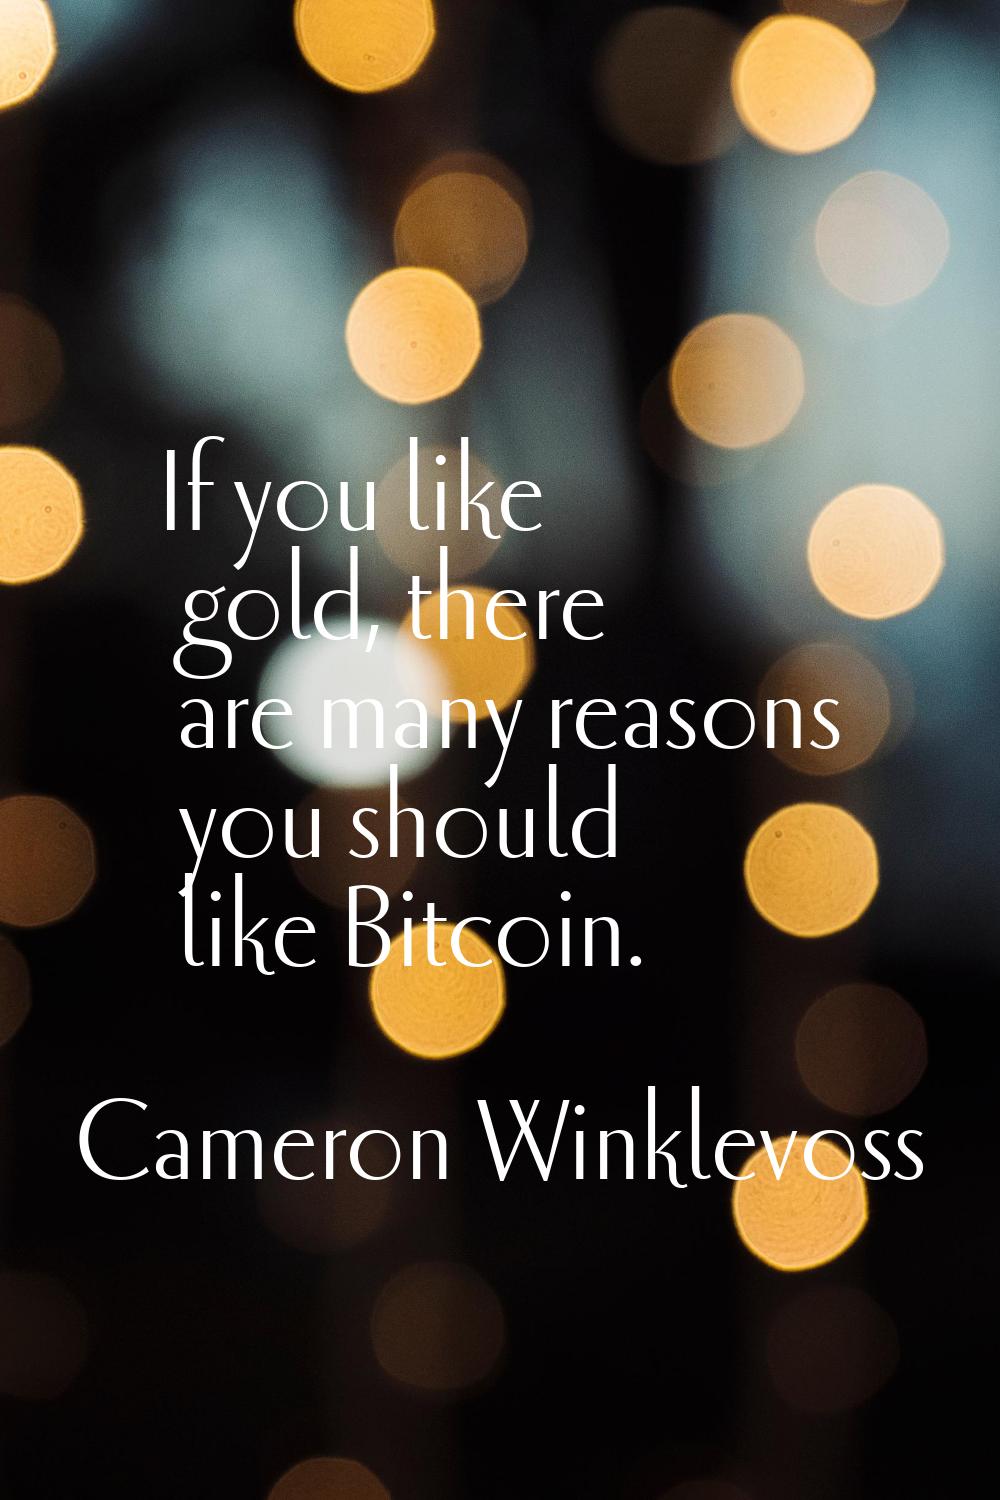 If you like gold, there are many reasons you should like Bitcoin.